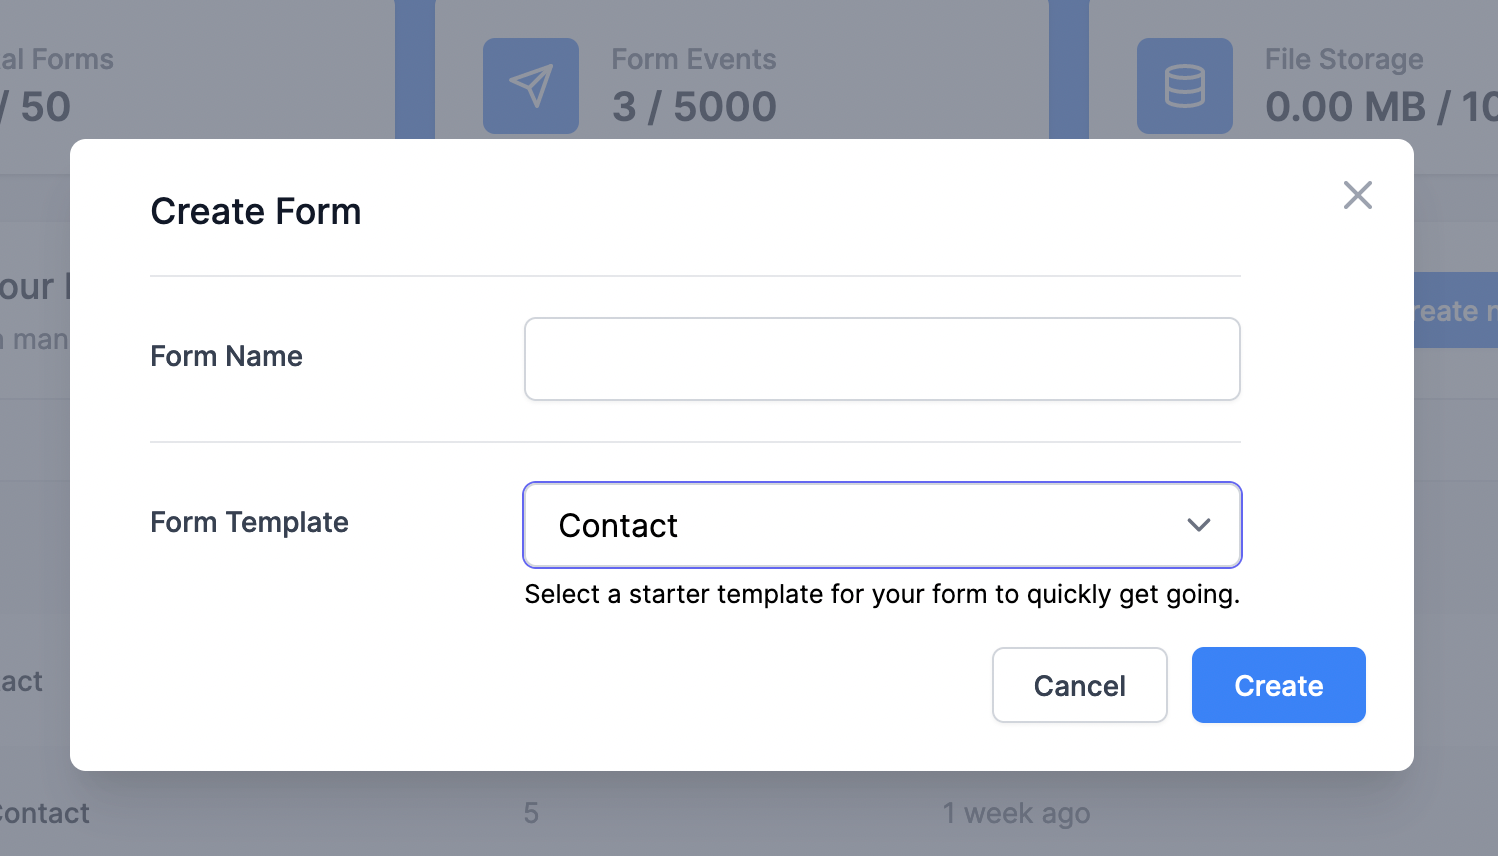 Formie: Selecting a form template